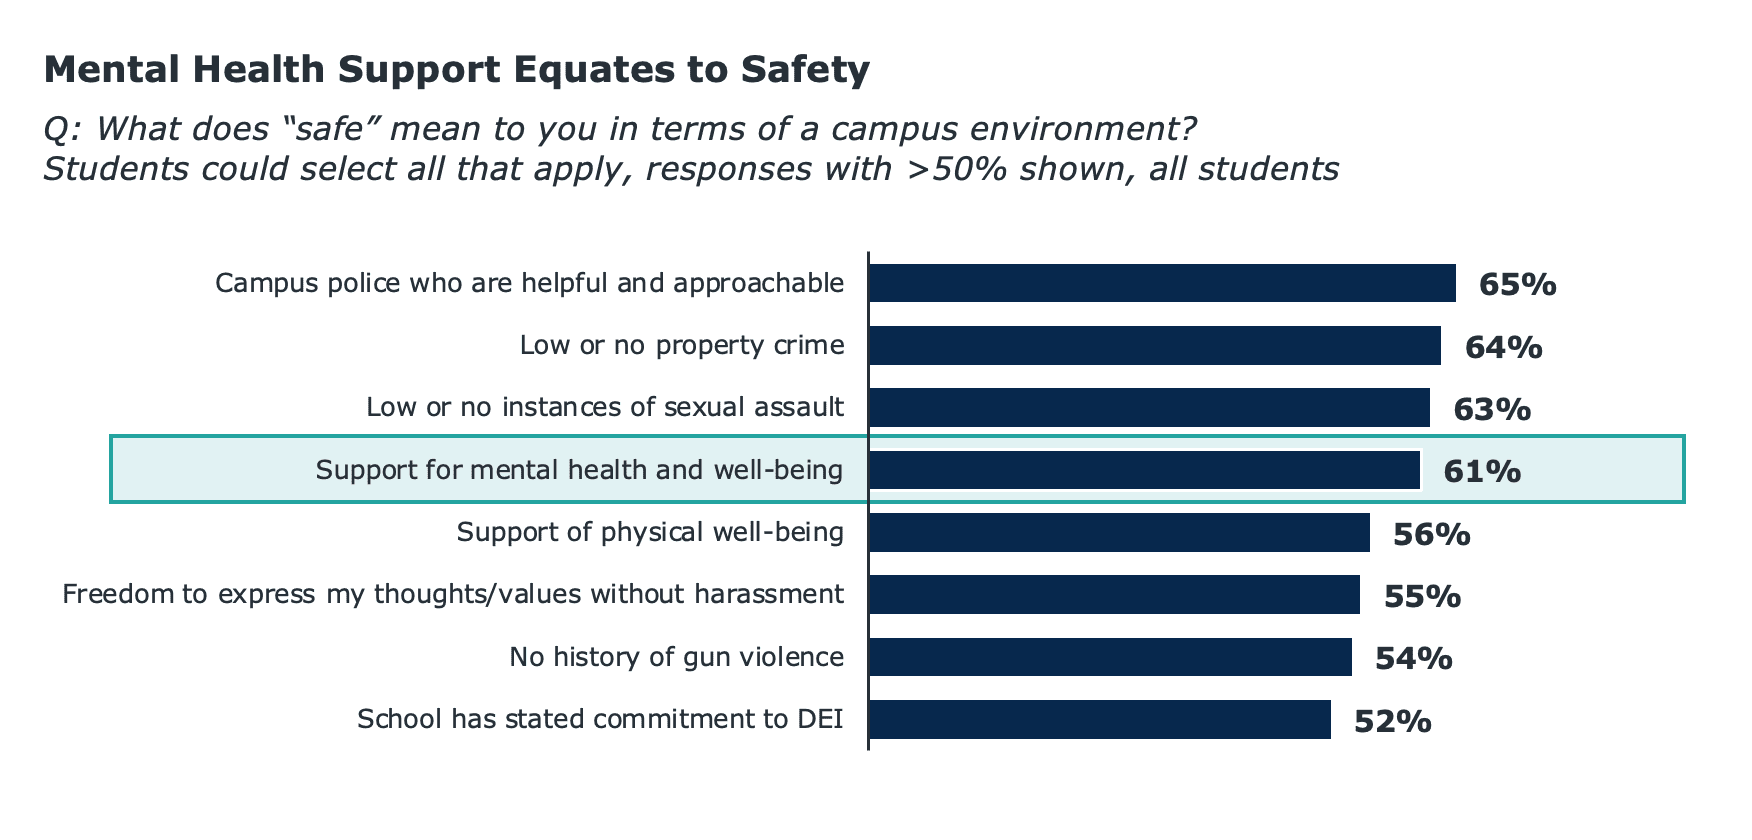 Bar chart showing what "safe" means to students in terms of a campus environment.